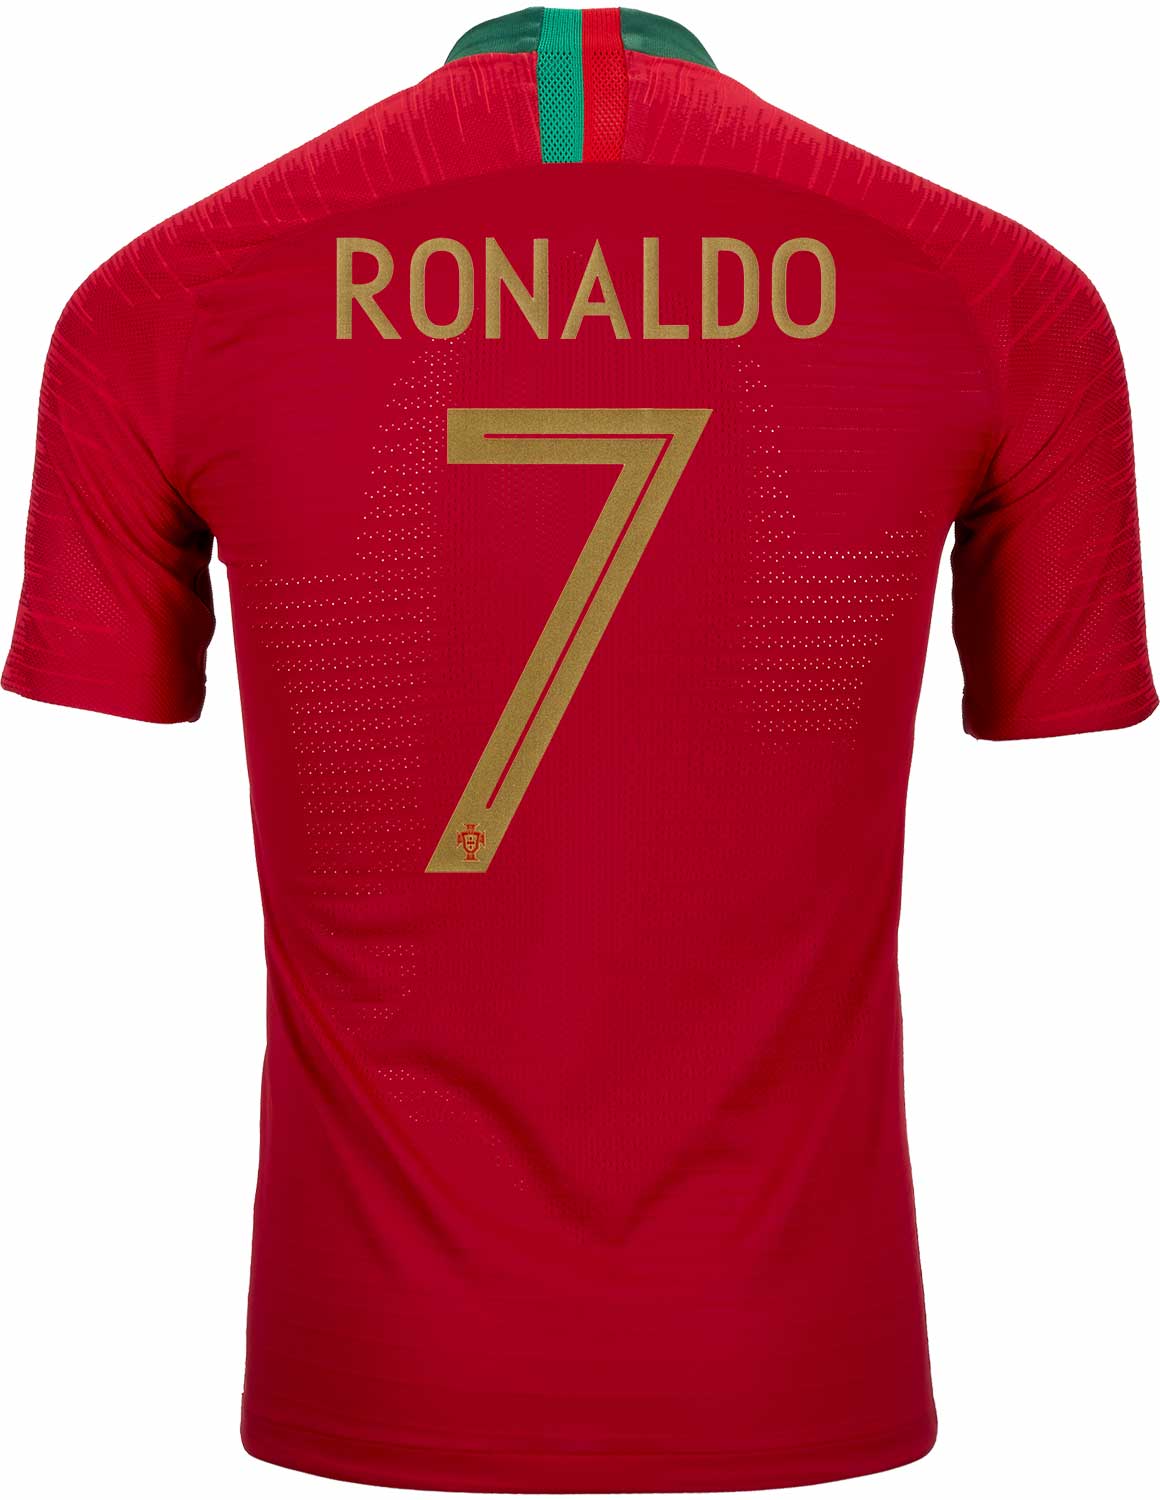 cristiano ronaldo portugal jersey,Save up to